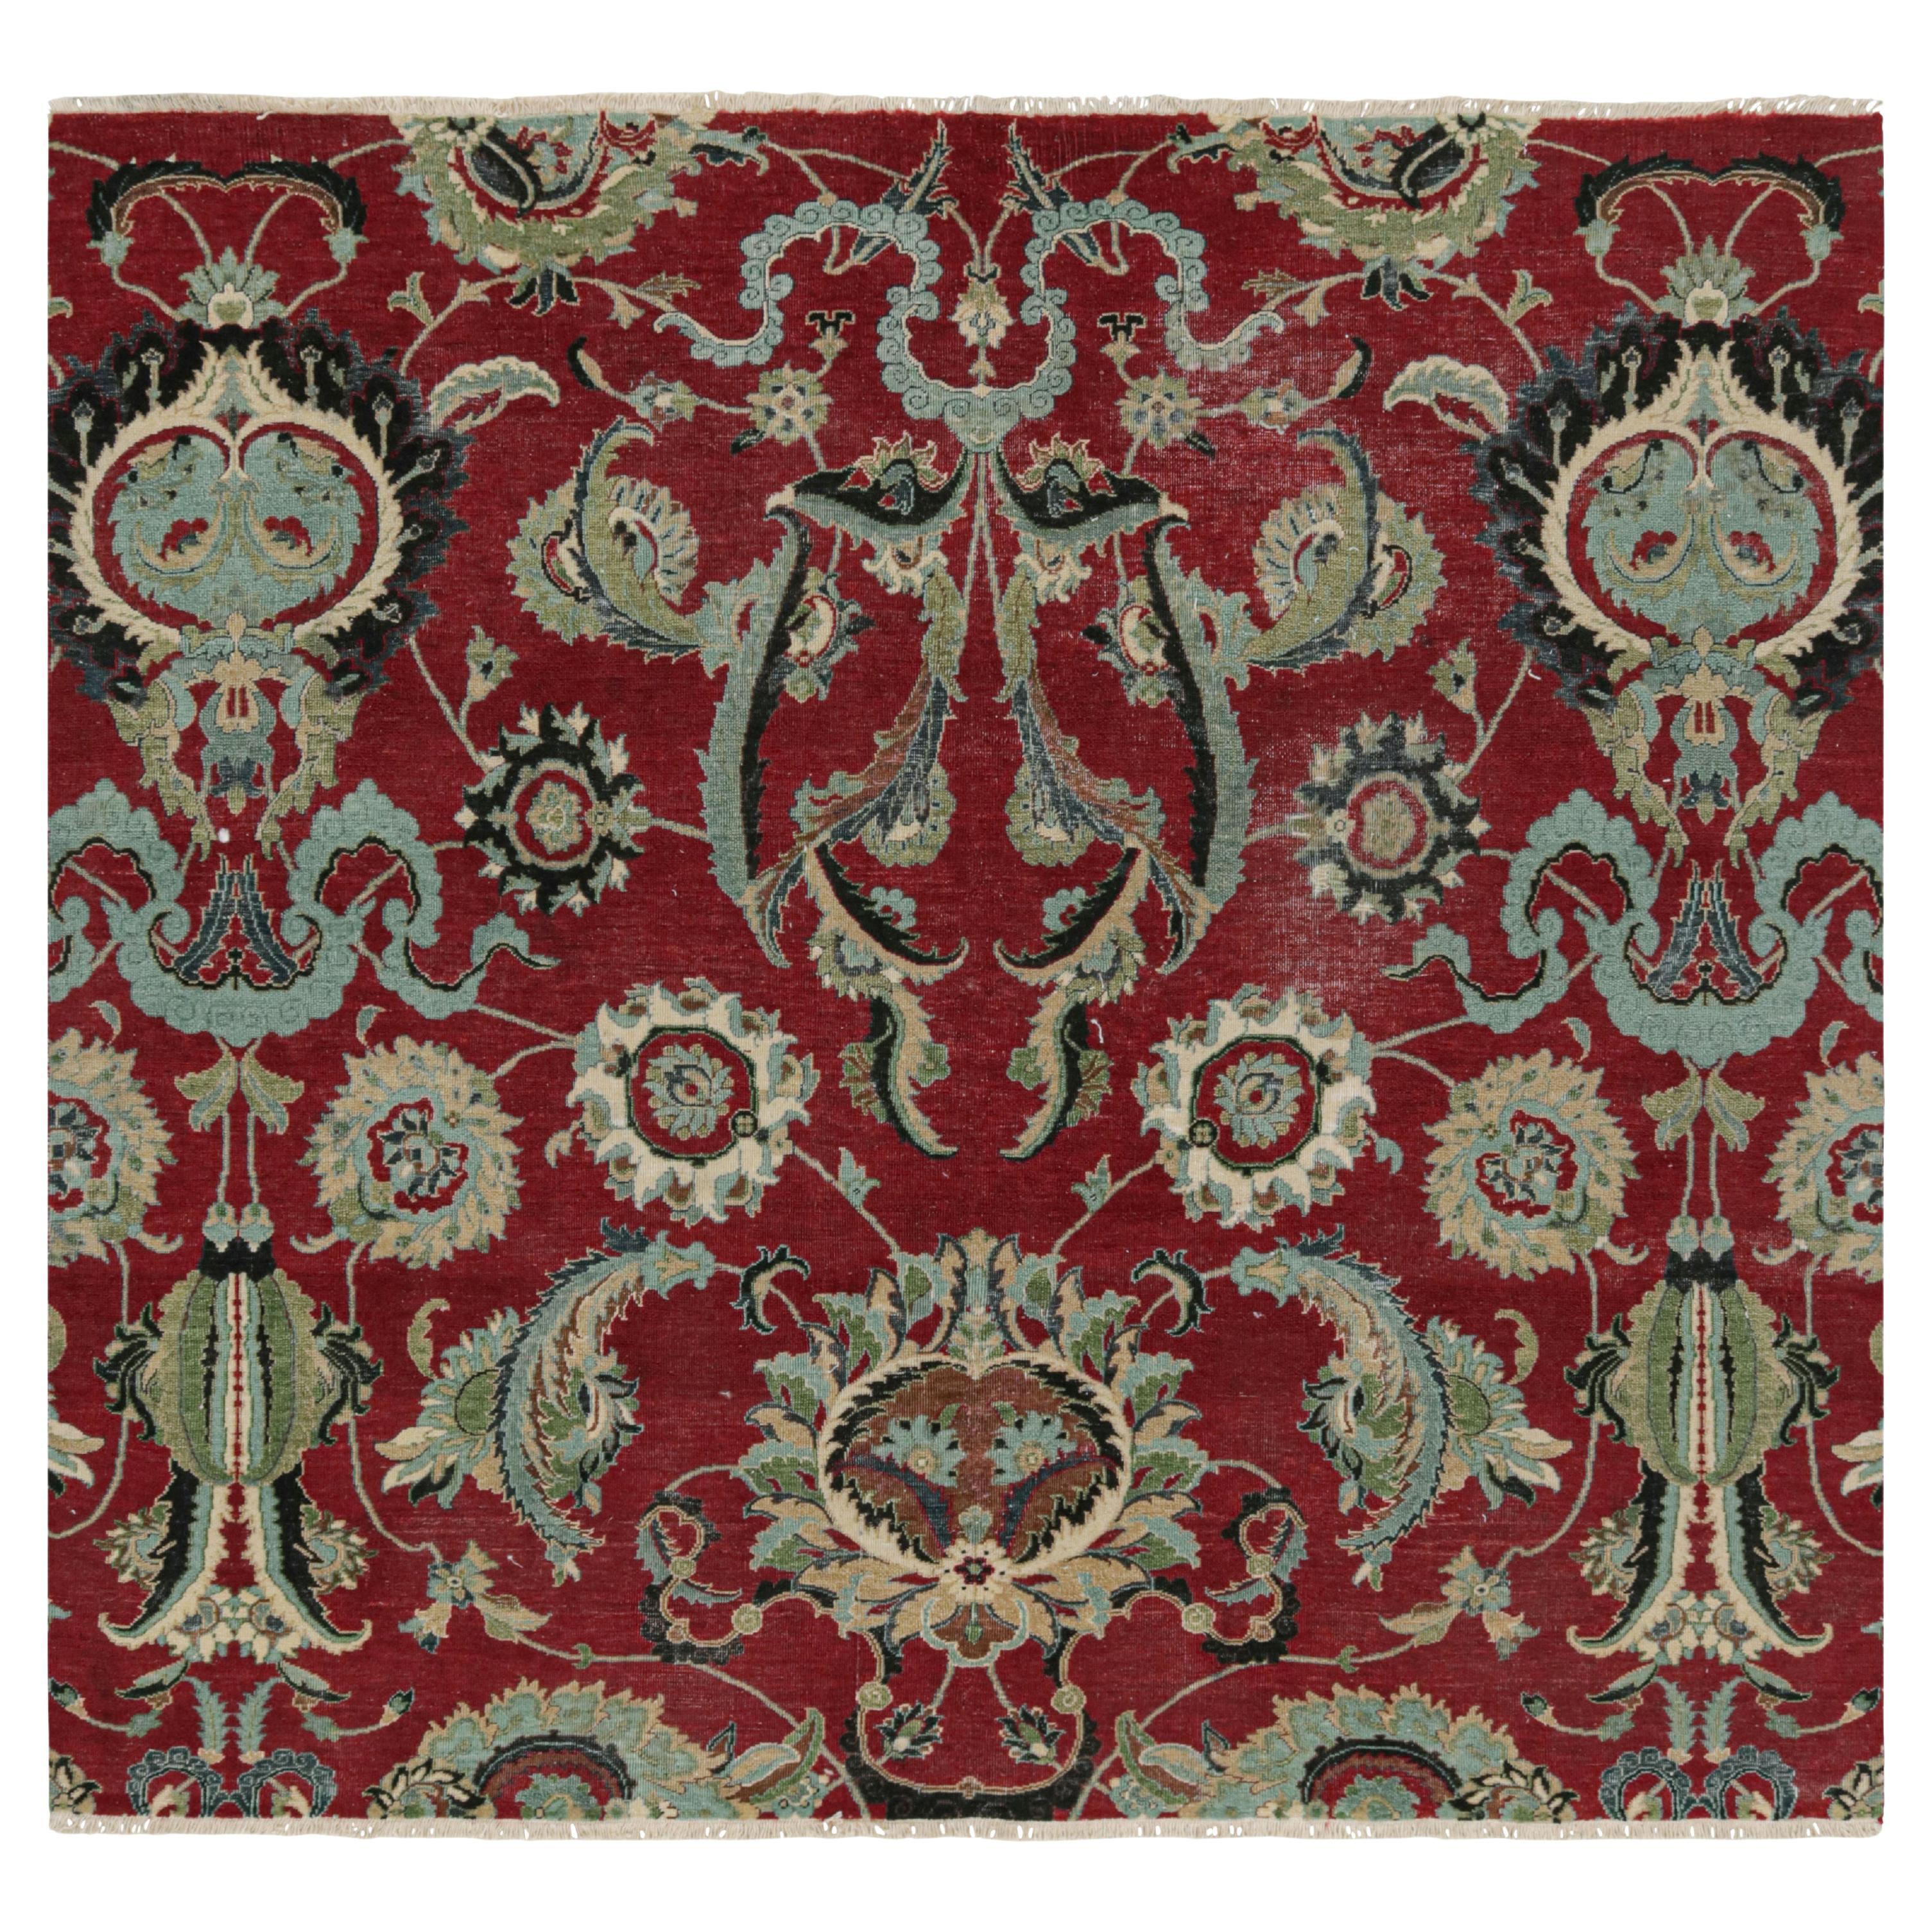 Rug & Kilim's Persian Isfahan Style Square Rug in Burgundy with Floral Patterns (tapis carré persan de style Ispahan à motifs floraux) en vente